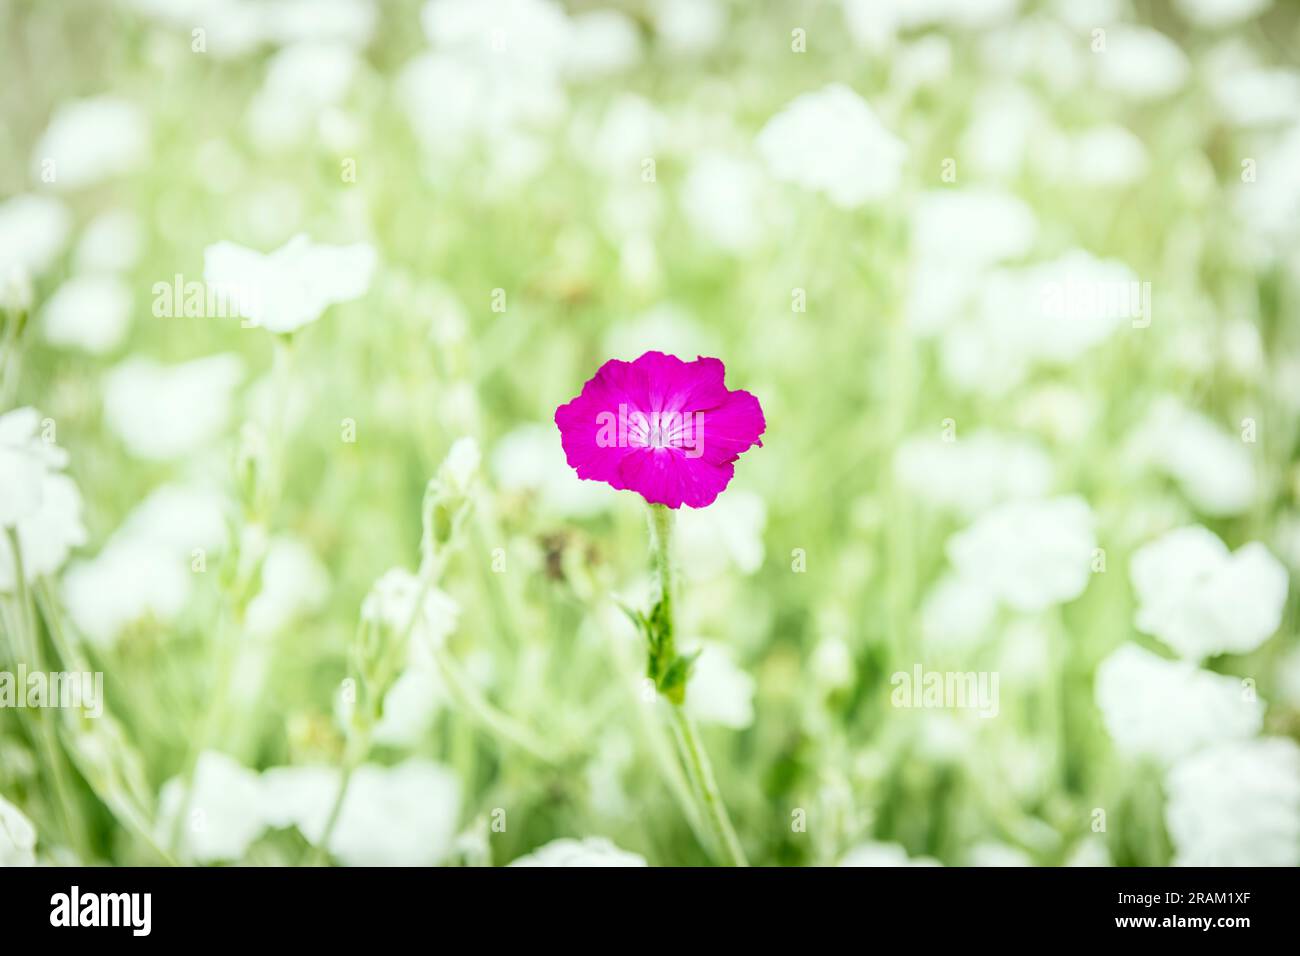 A purple flower standing out in a field of white flowers Stock Photo